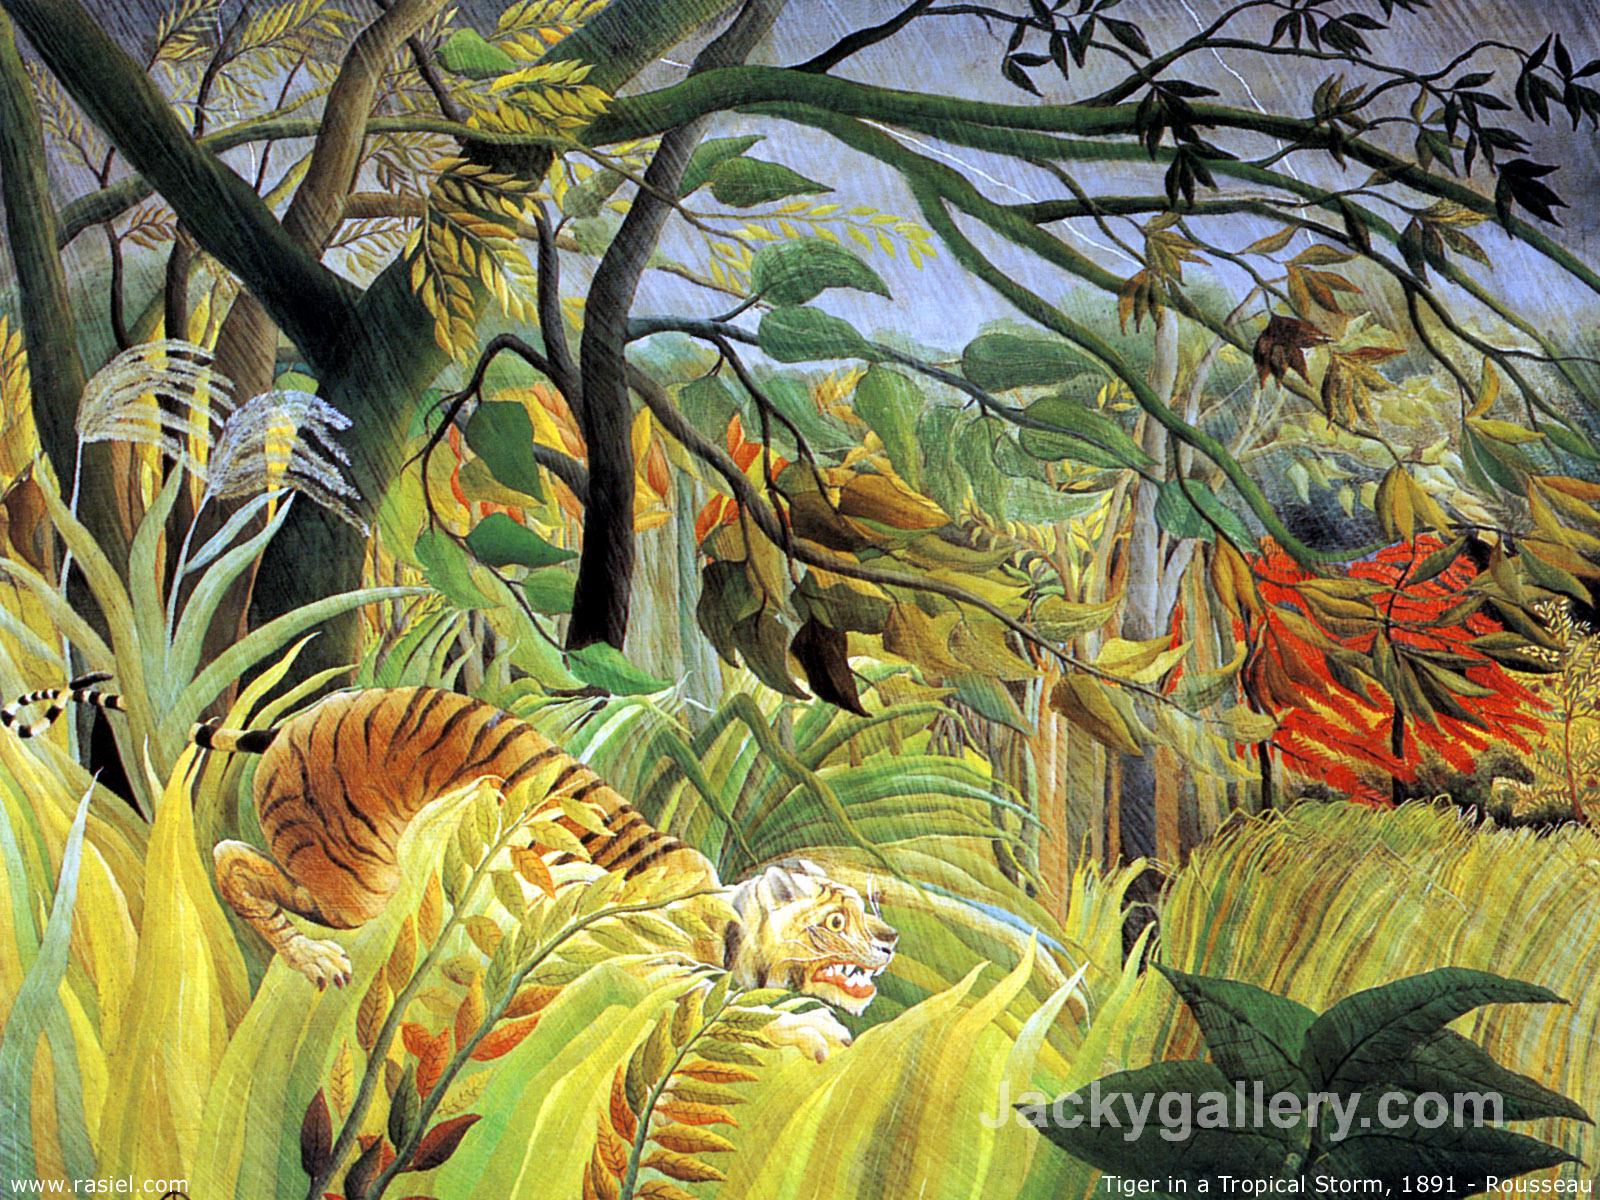 Tiger in a Tropical Storm (Surprised) by Henri Rousseau paintings reproduction